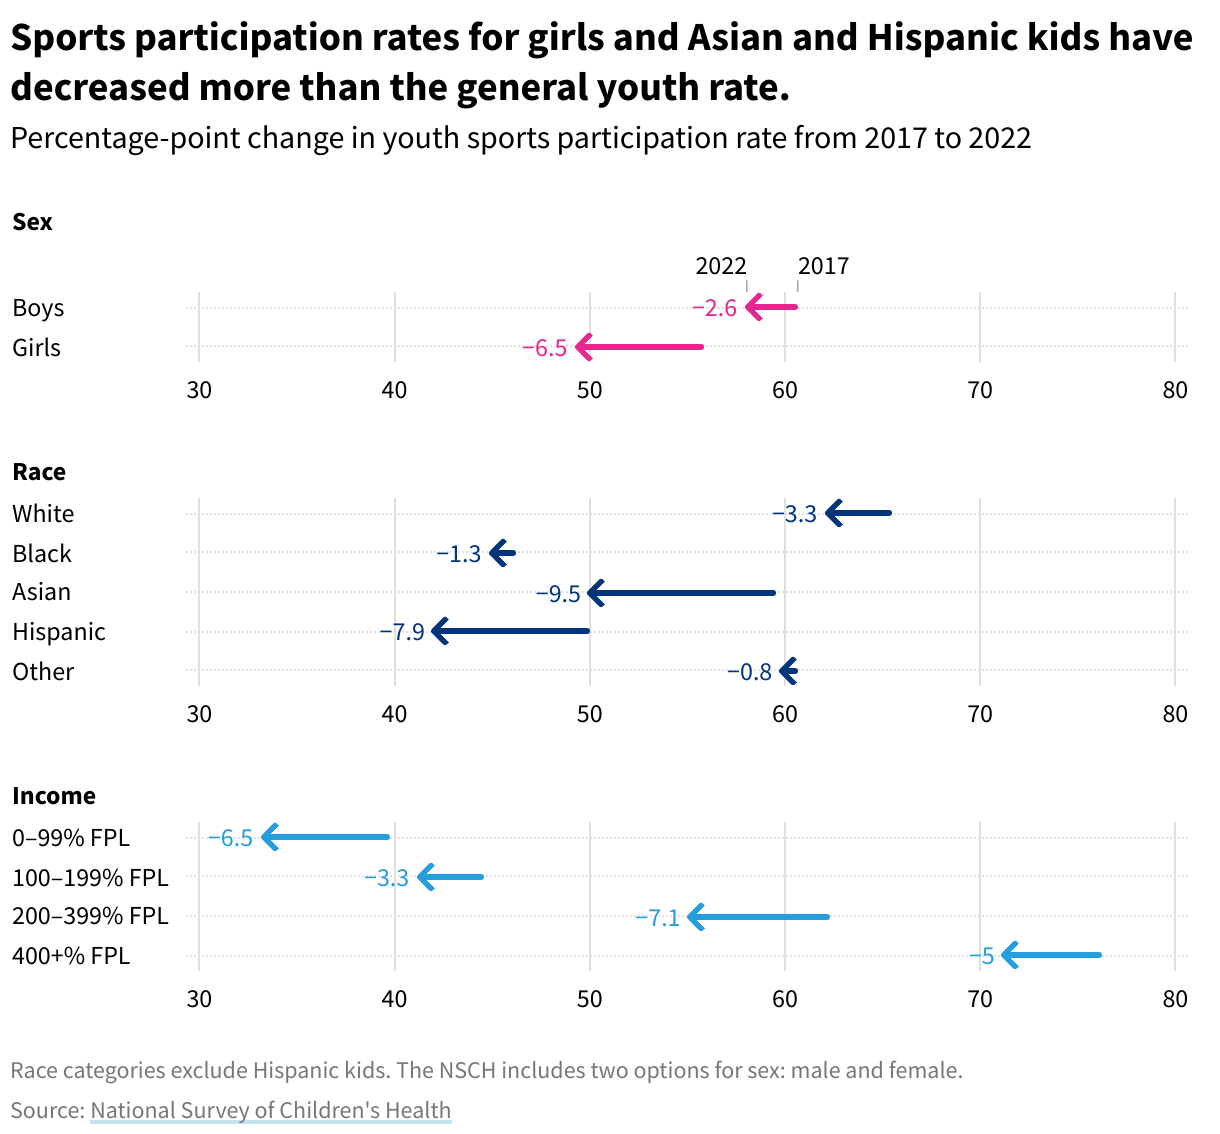 An arrow plot showing the percentage-point change in youth sports participation rate from 2017 to 2022 by demographic. Rates for girls and Asian and Hispanic kids have decreased more than the general youth rate.